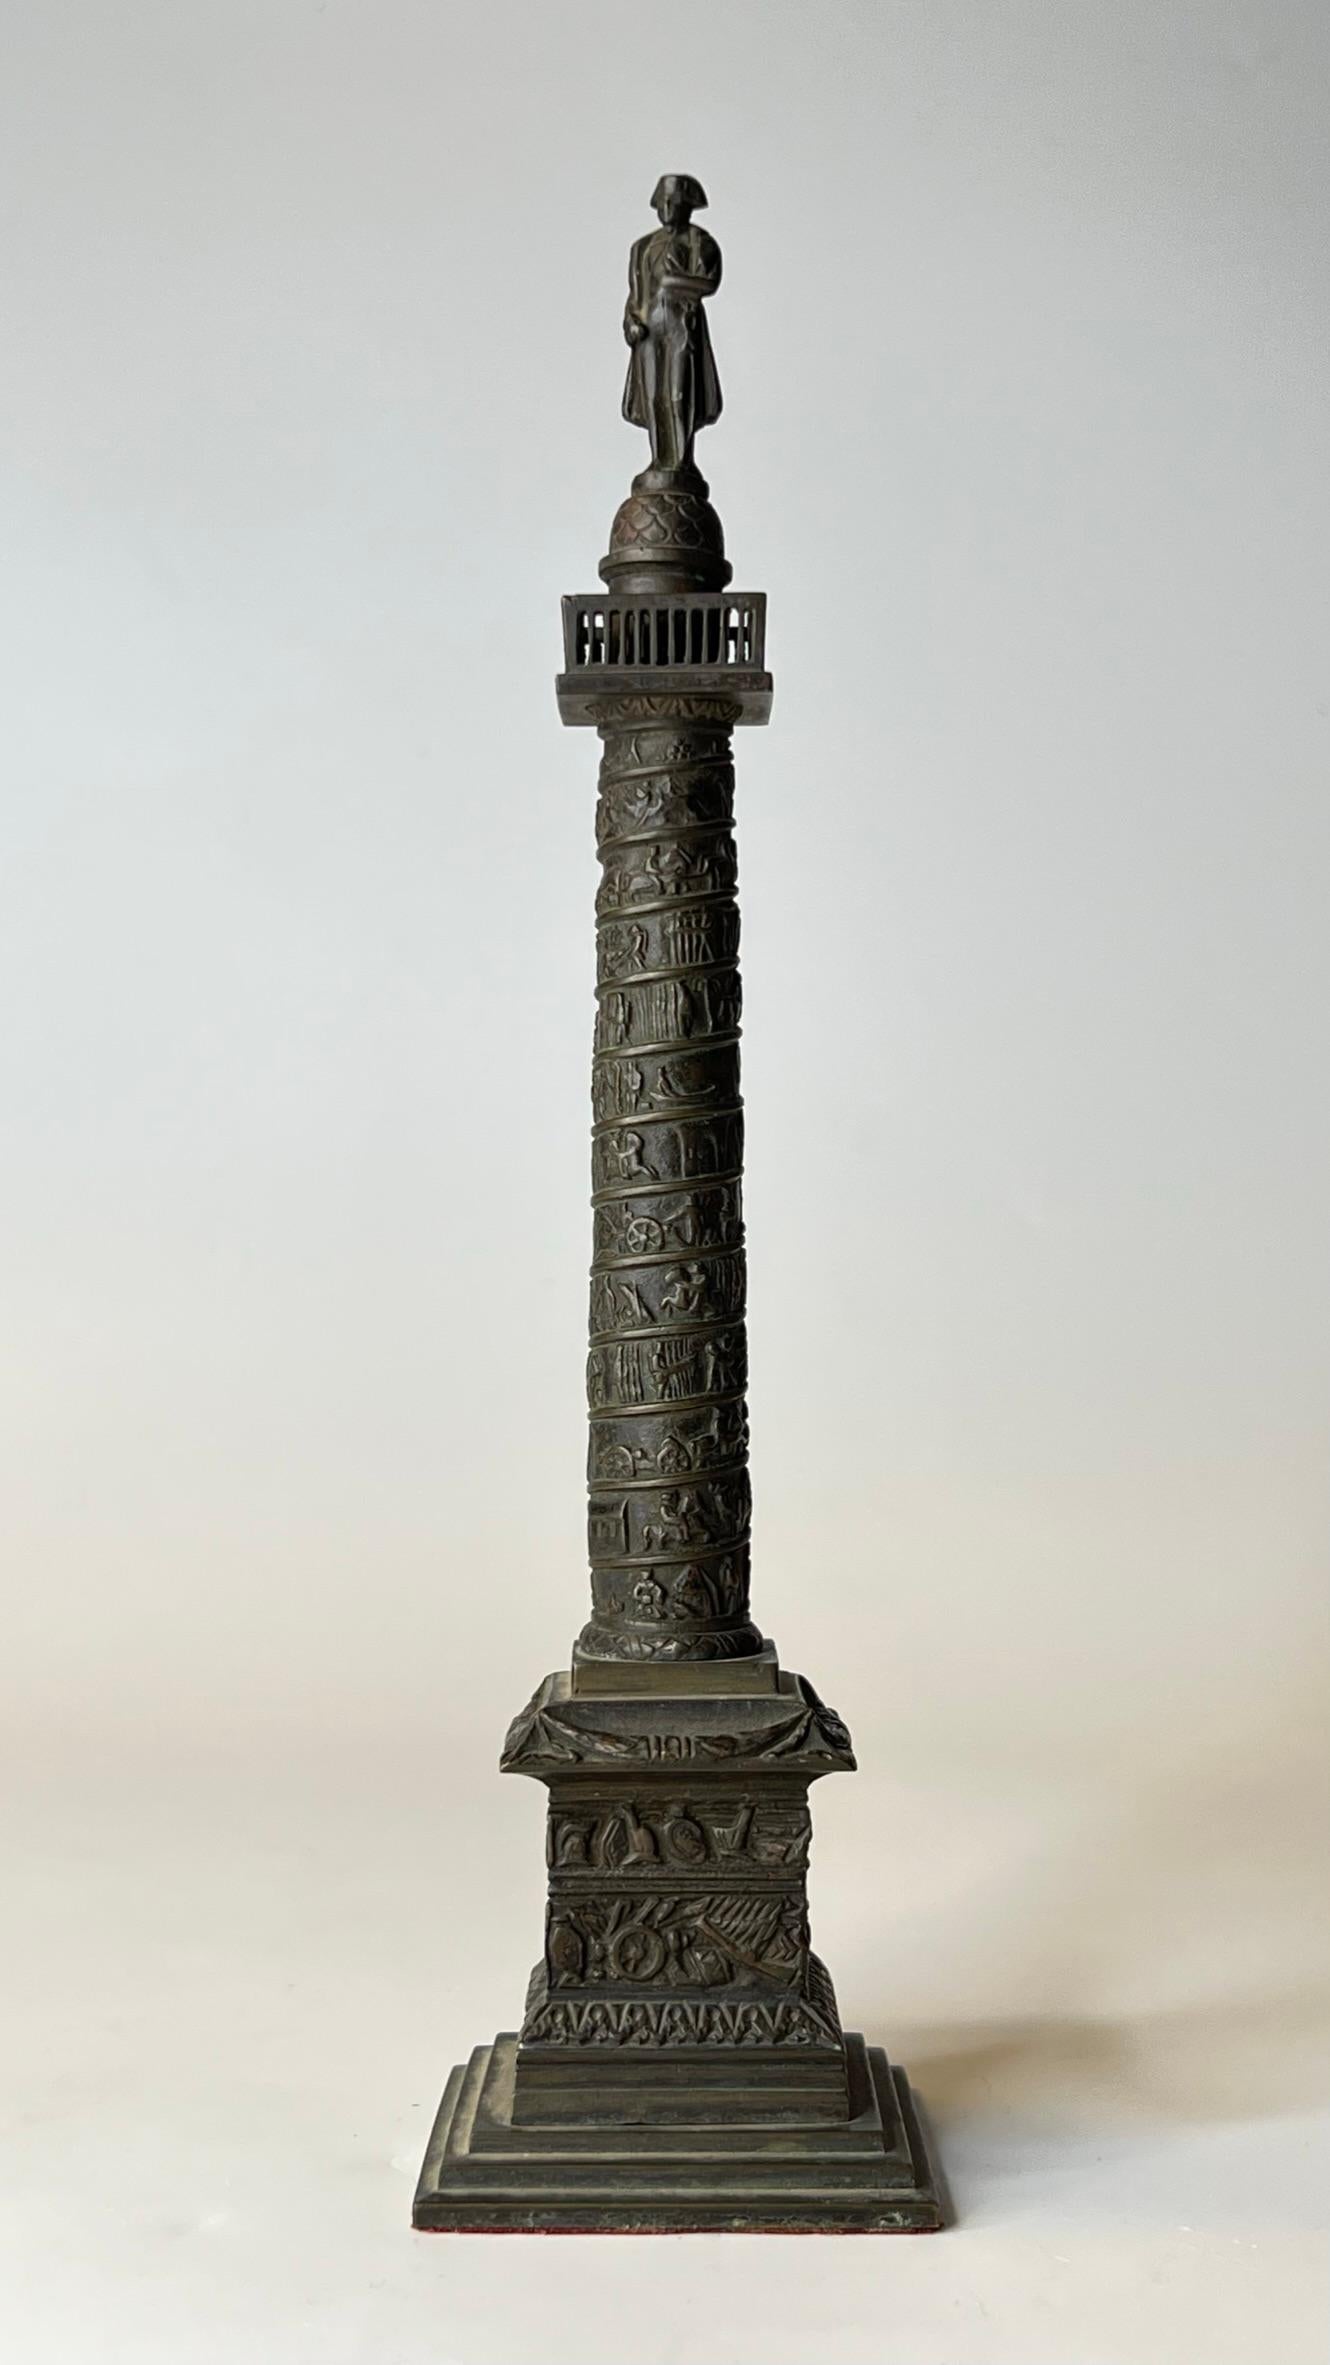 Our 19th century Grand Tour bronze of the the Colonne Vendôme (Vendome Column) measures 10 3/8 inches tall. The original was installed at Place Vendome in Paris in 1810. It was modeled after Trajan's Column to celebrate Napoleon's victory at